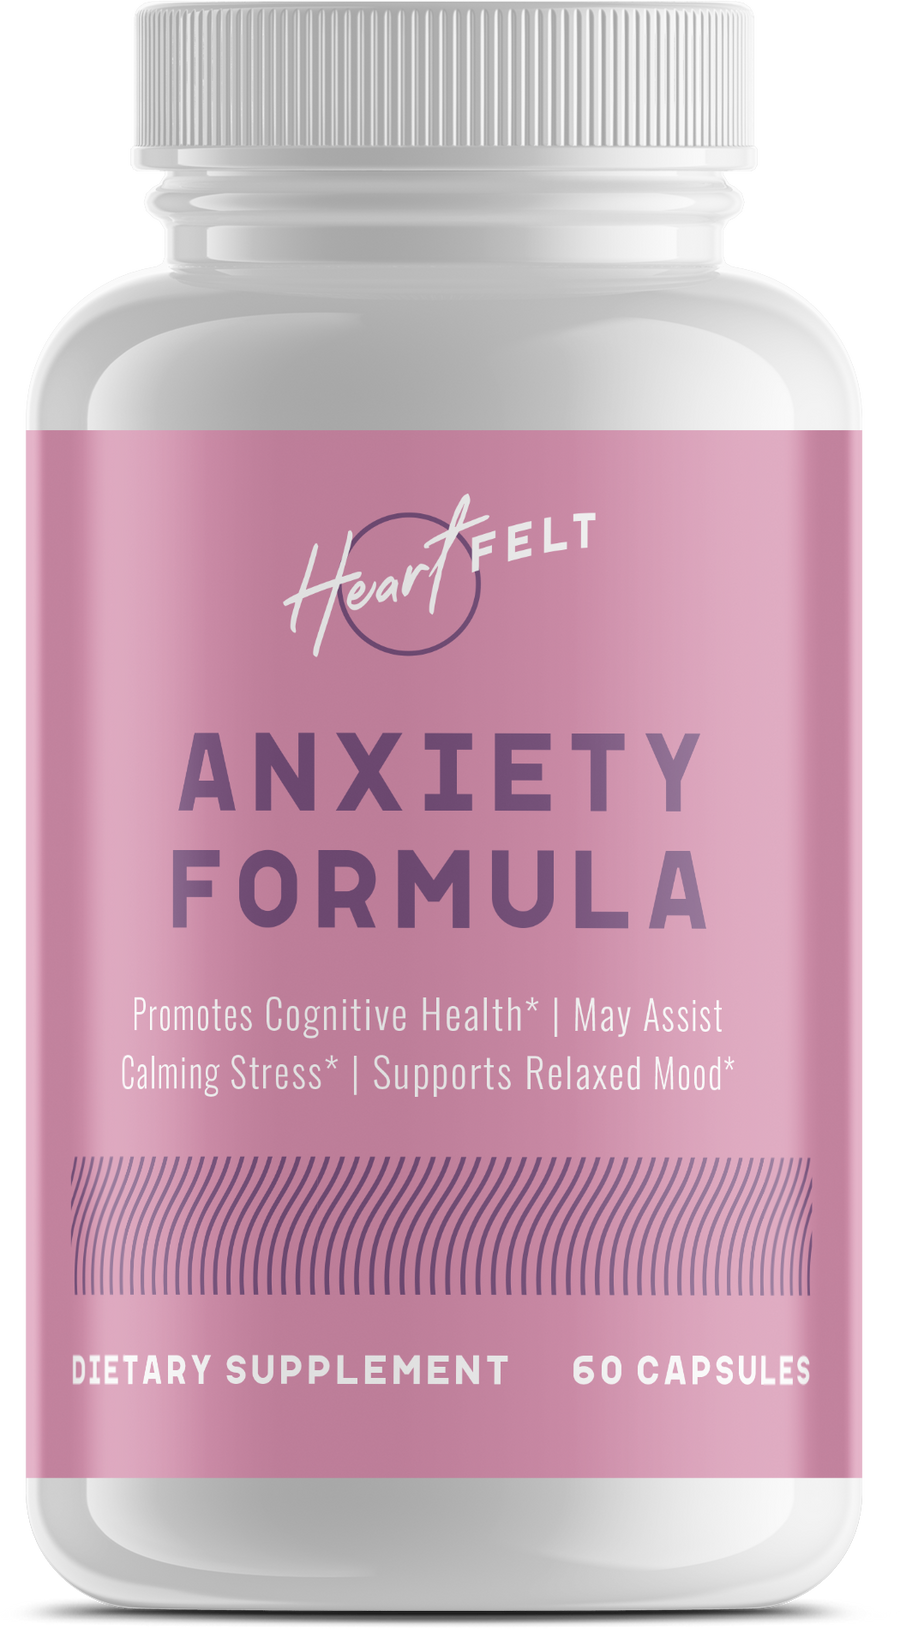 Anti Anxiety Formula For Overall Cognitive Health By Heartfelt